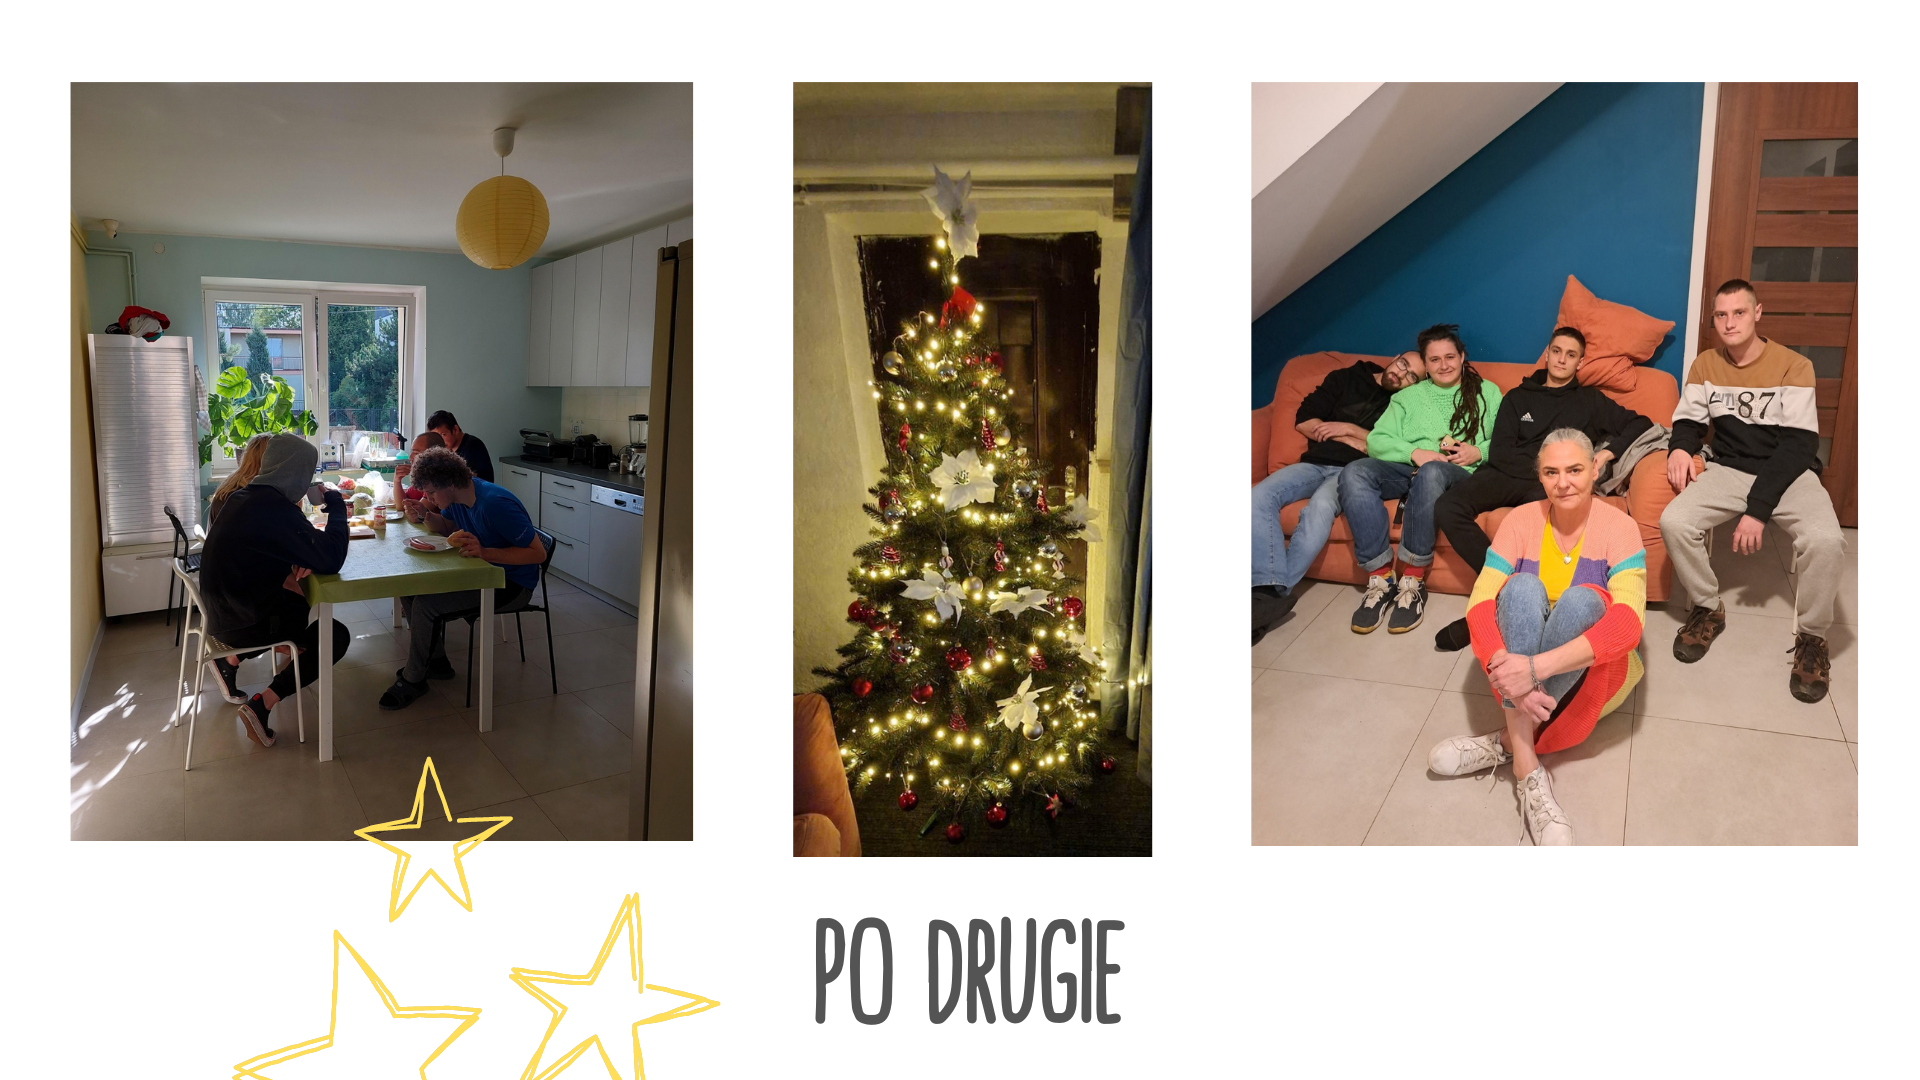 What’s new at the “Po drugie” foundation?